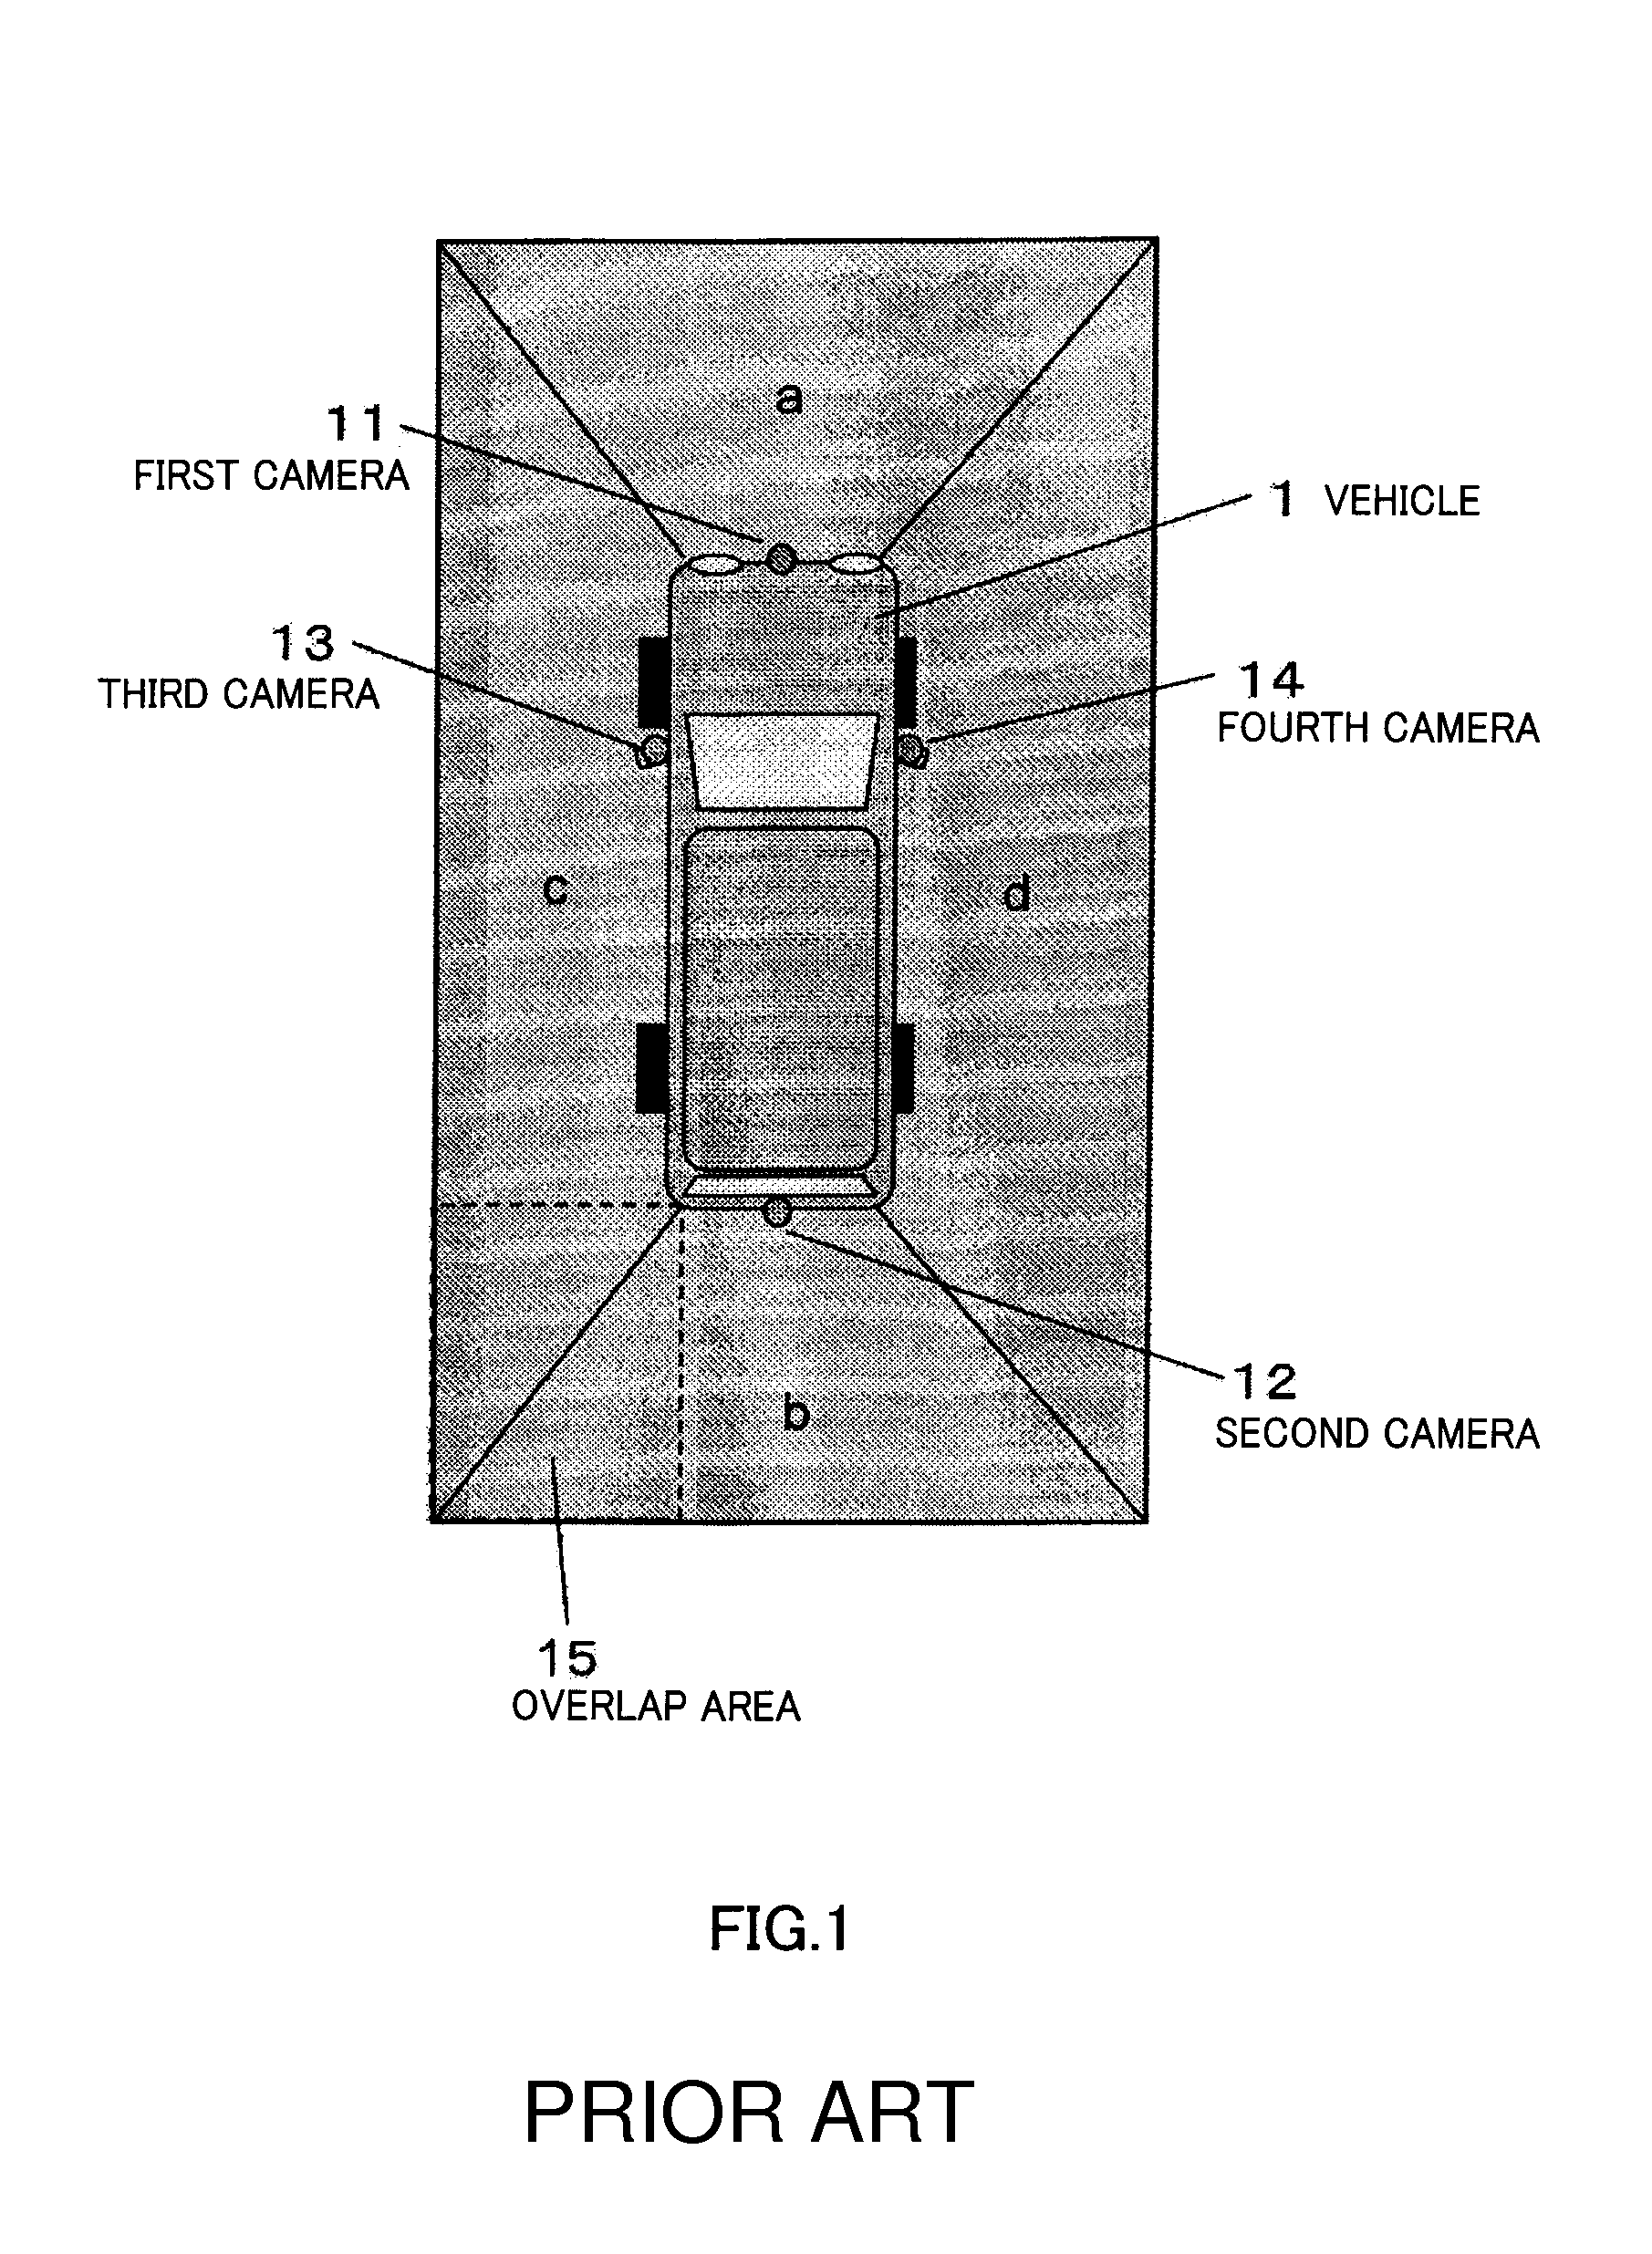 Driving support display device